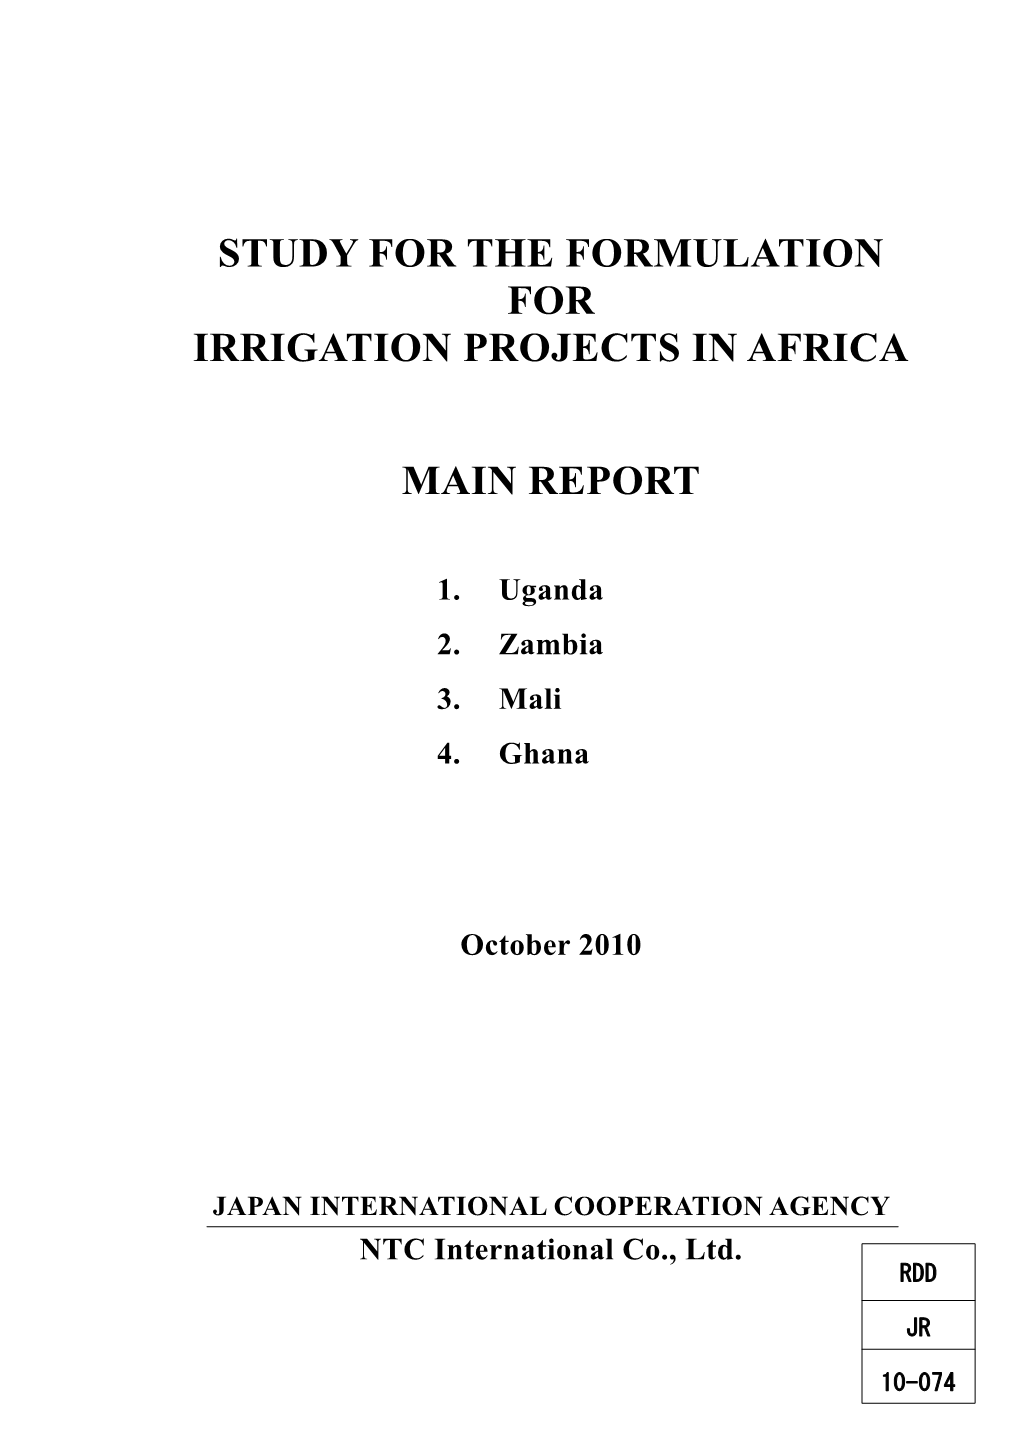 Study for the Formulation for Irrigation Projects in Africa